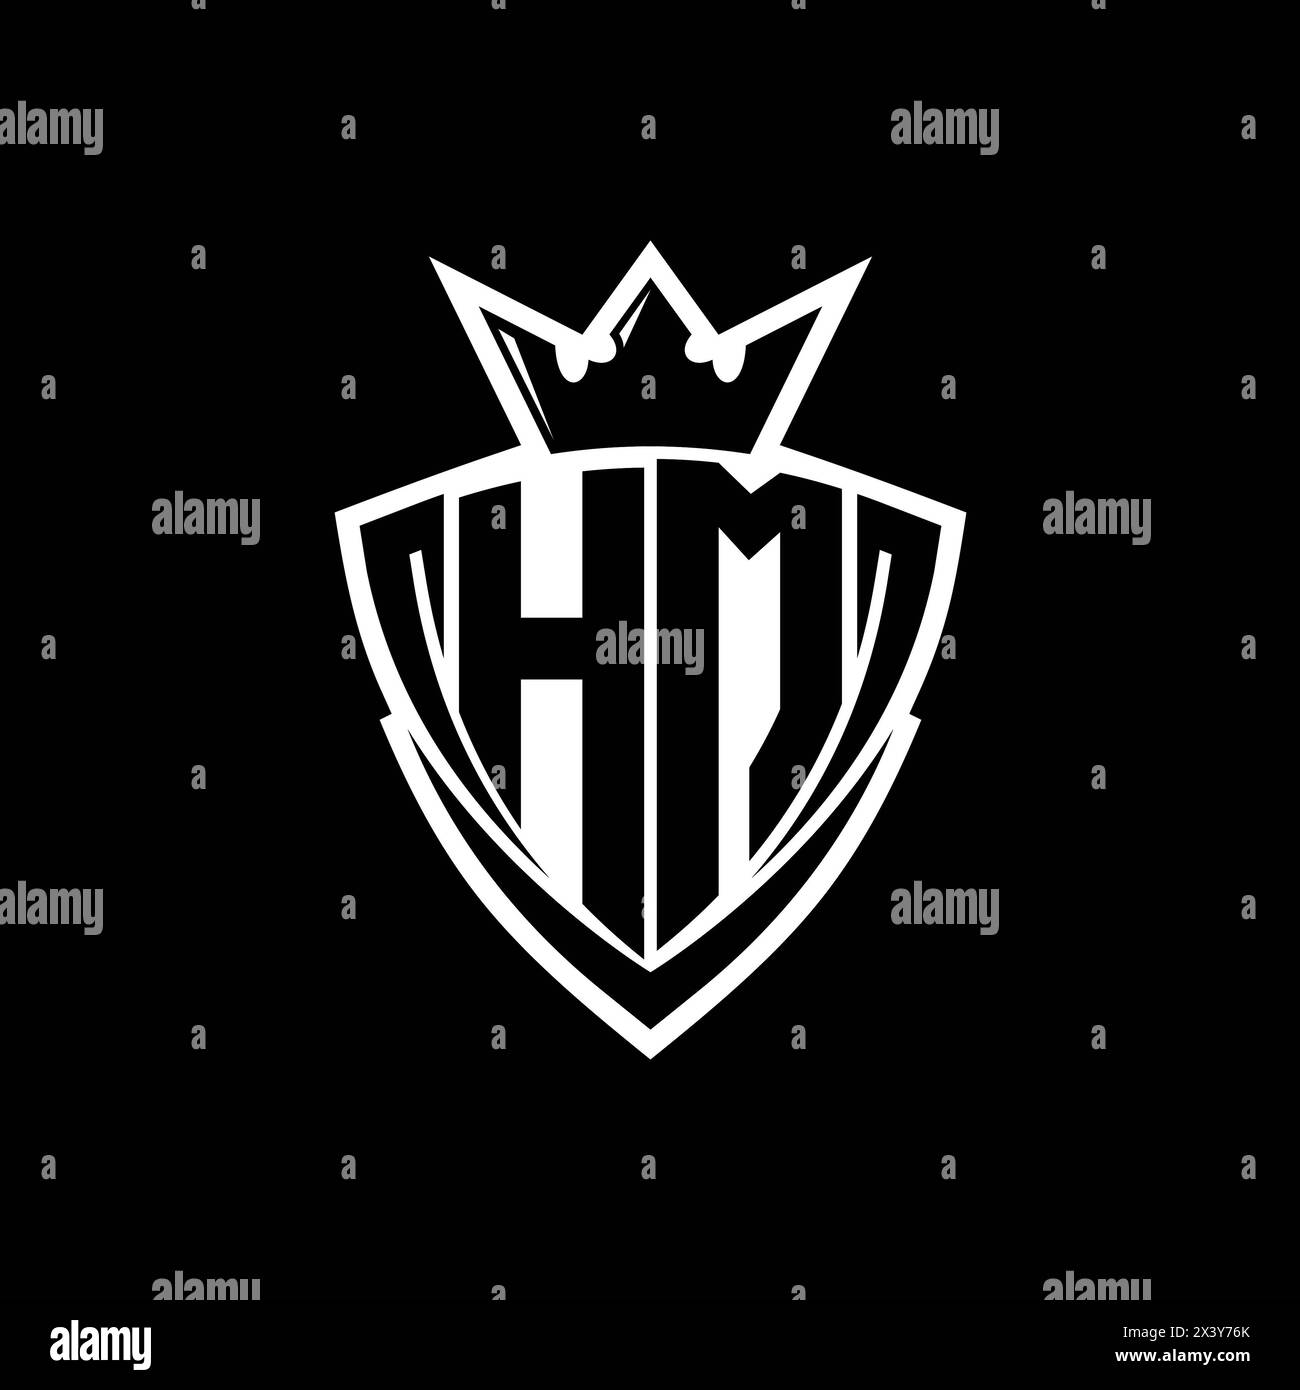 HM Bold letter logo with sharp triangle shield shape with crown inside white outline on black background template design Stock Photo